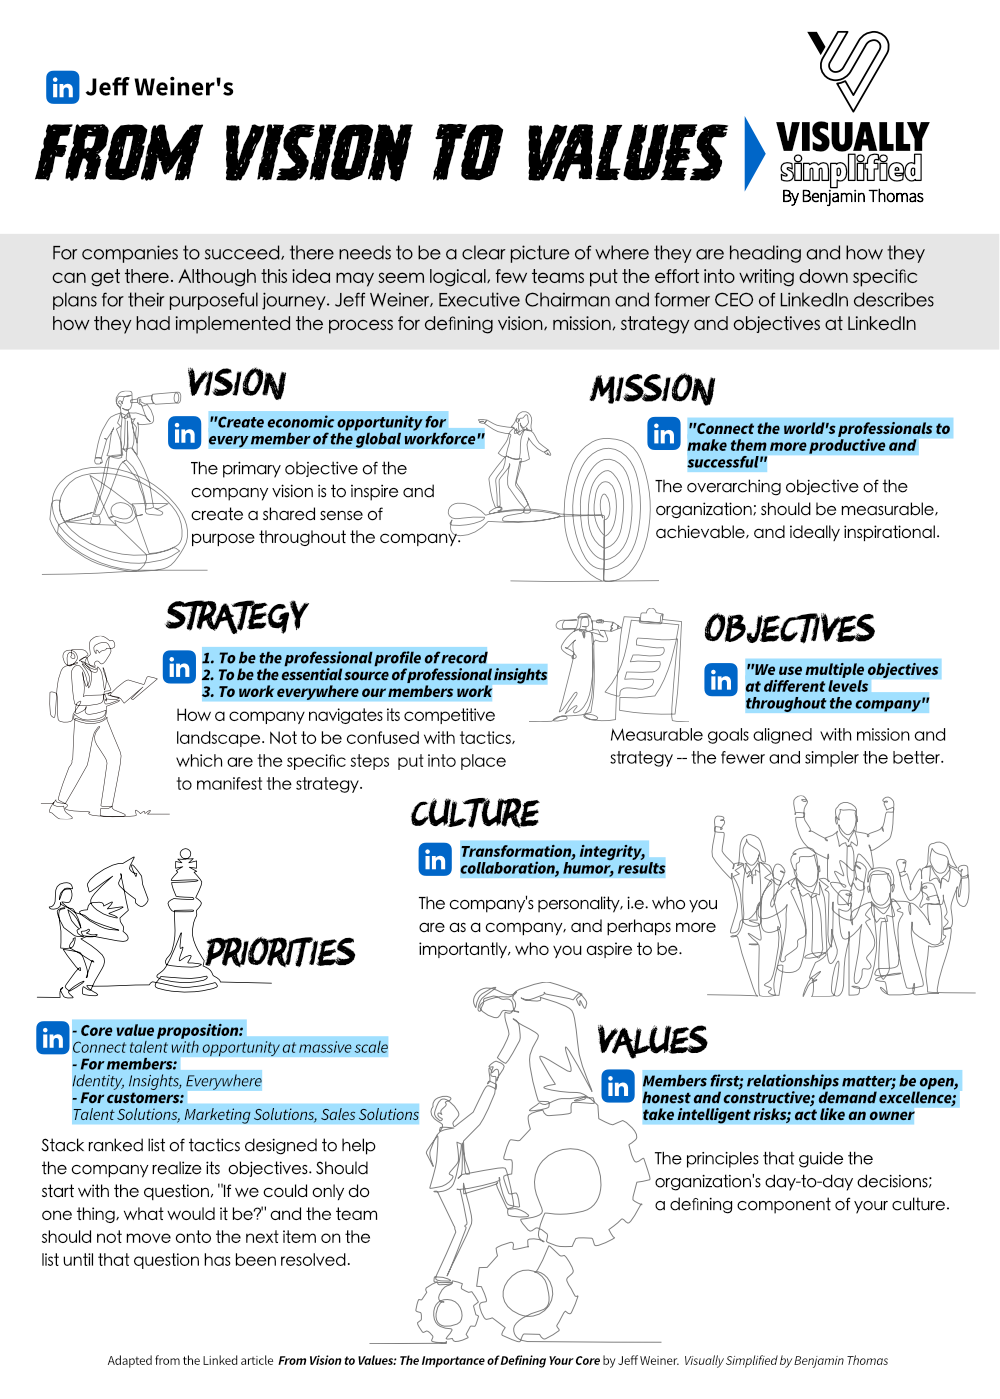 Jeff Weiner's From Vision to Values - Visually Simplified by Benjamin Thomas